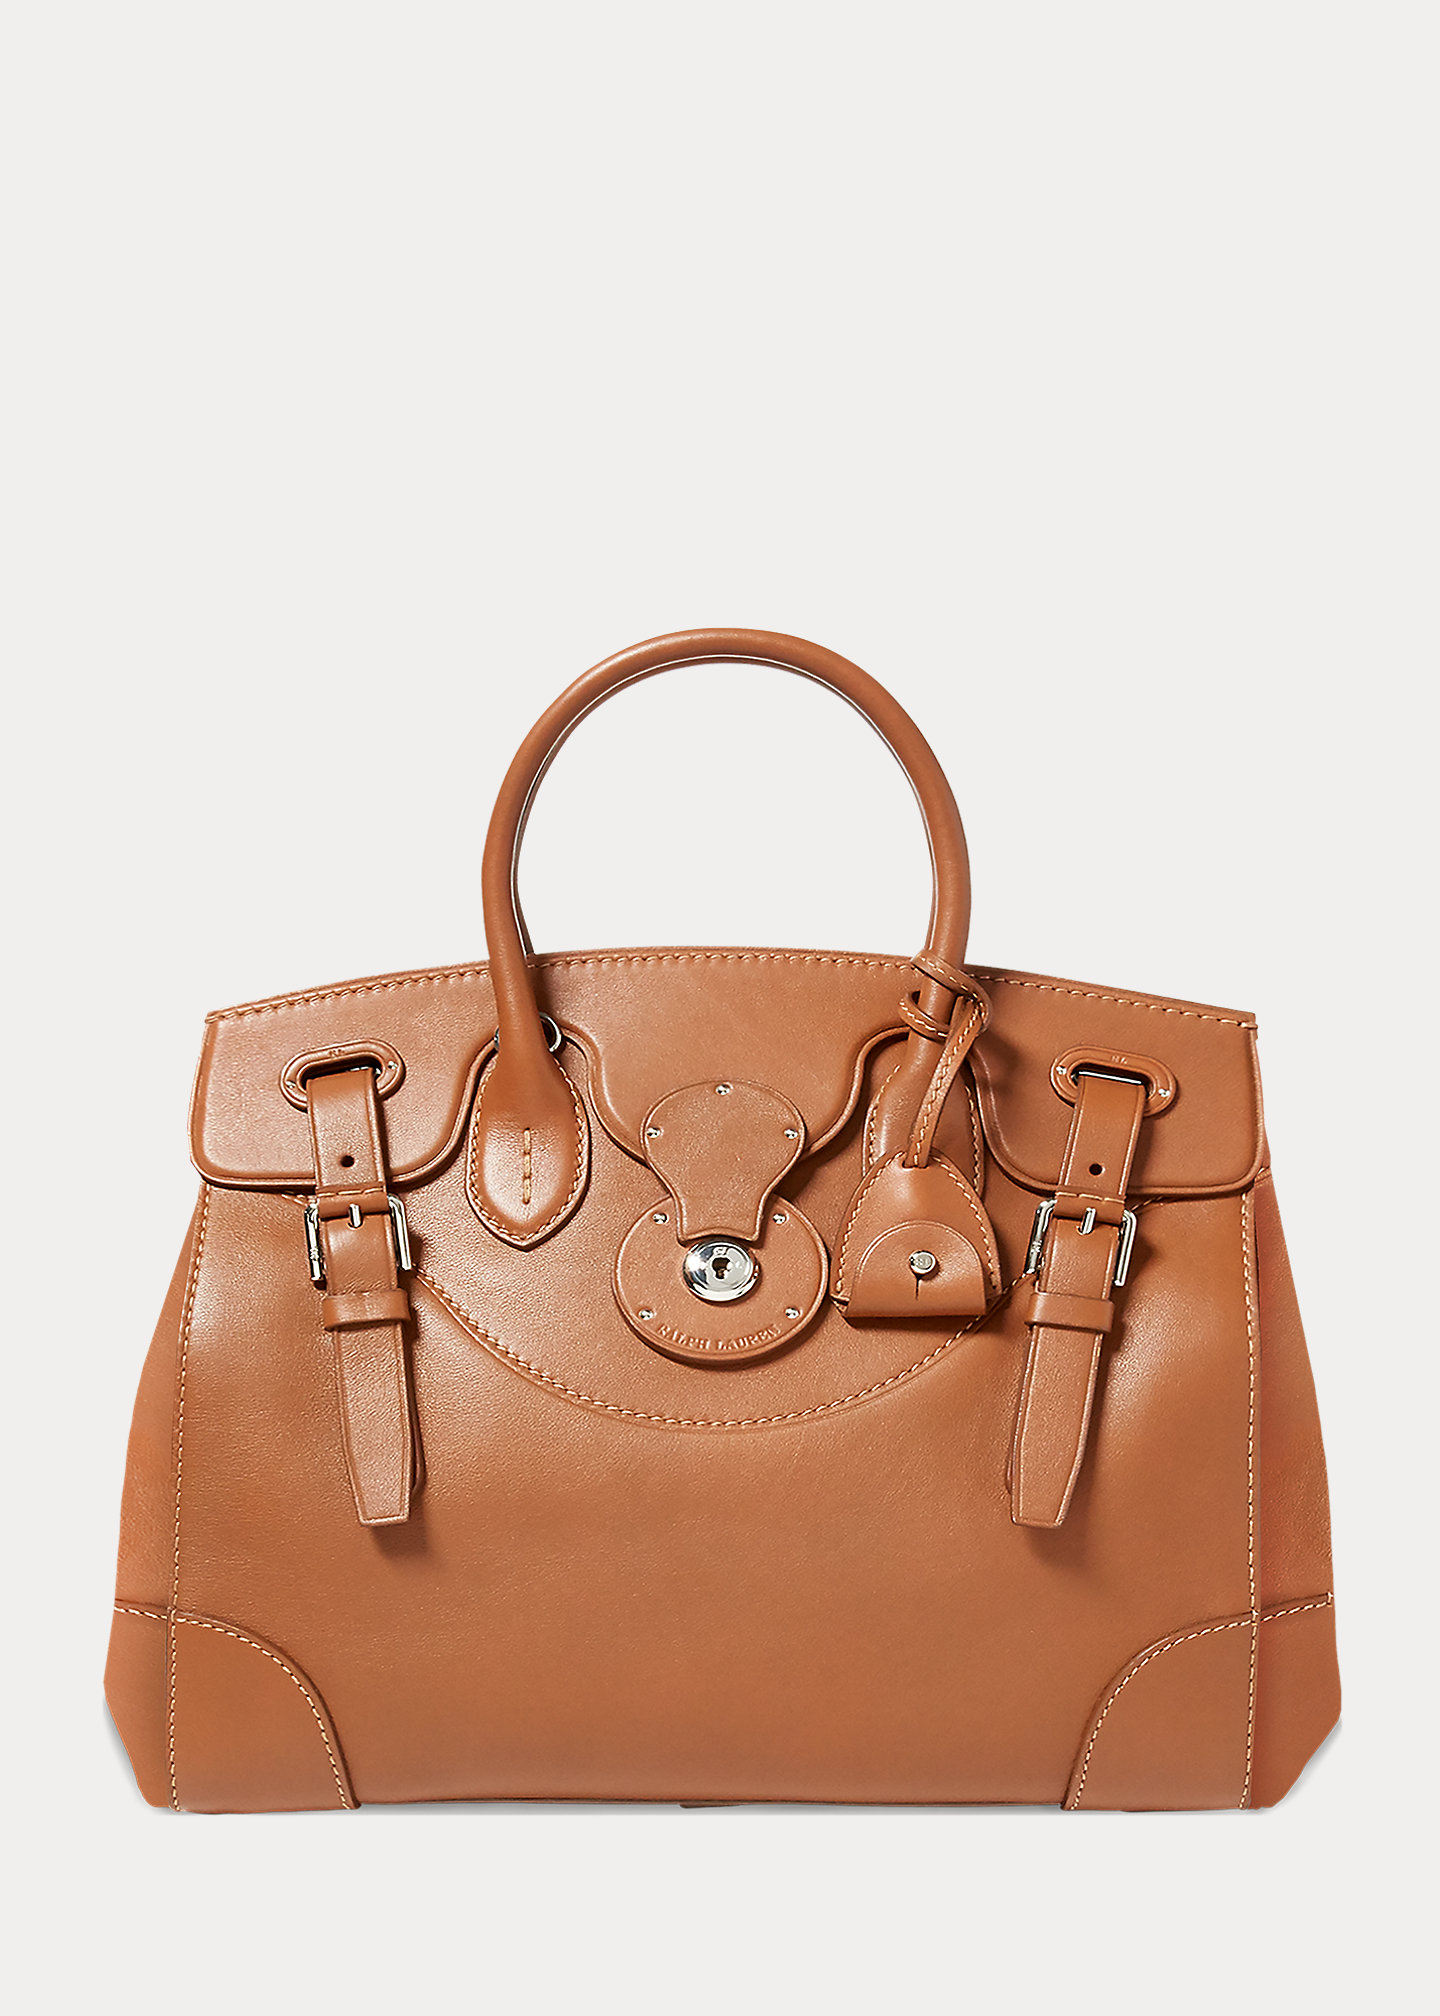 Underrated Handbags That'll Last You A Lifetime